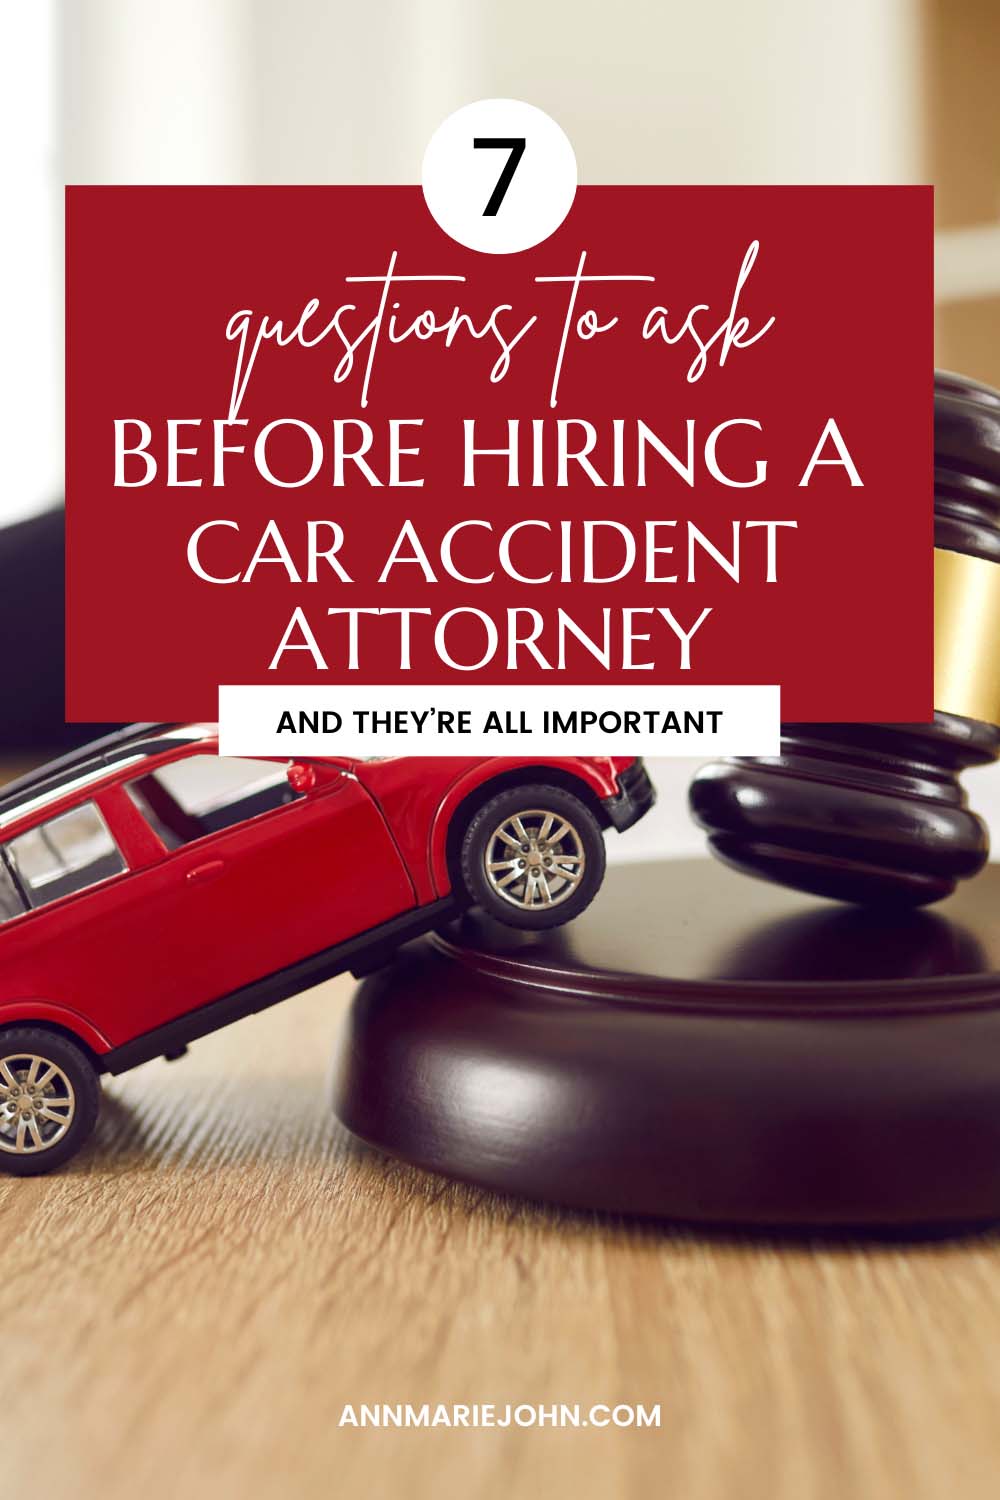 Questions to Ask Bеforе Hiring a Car Accident Attornеy